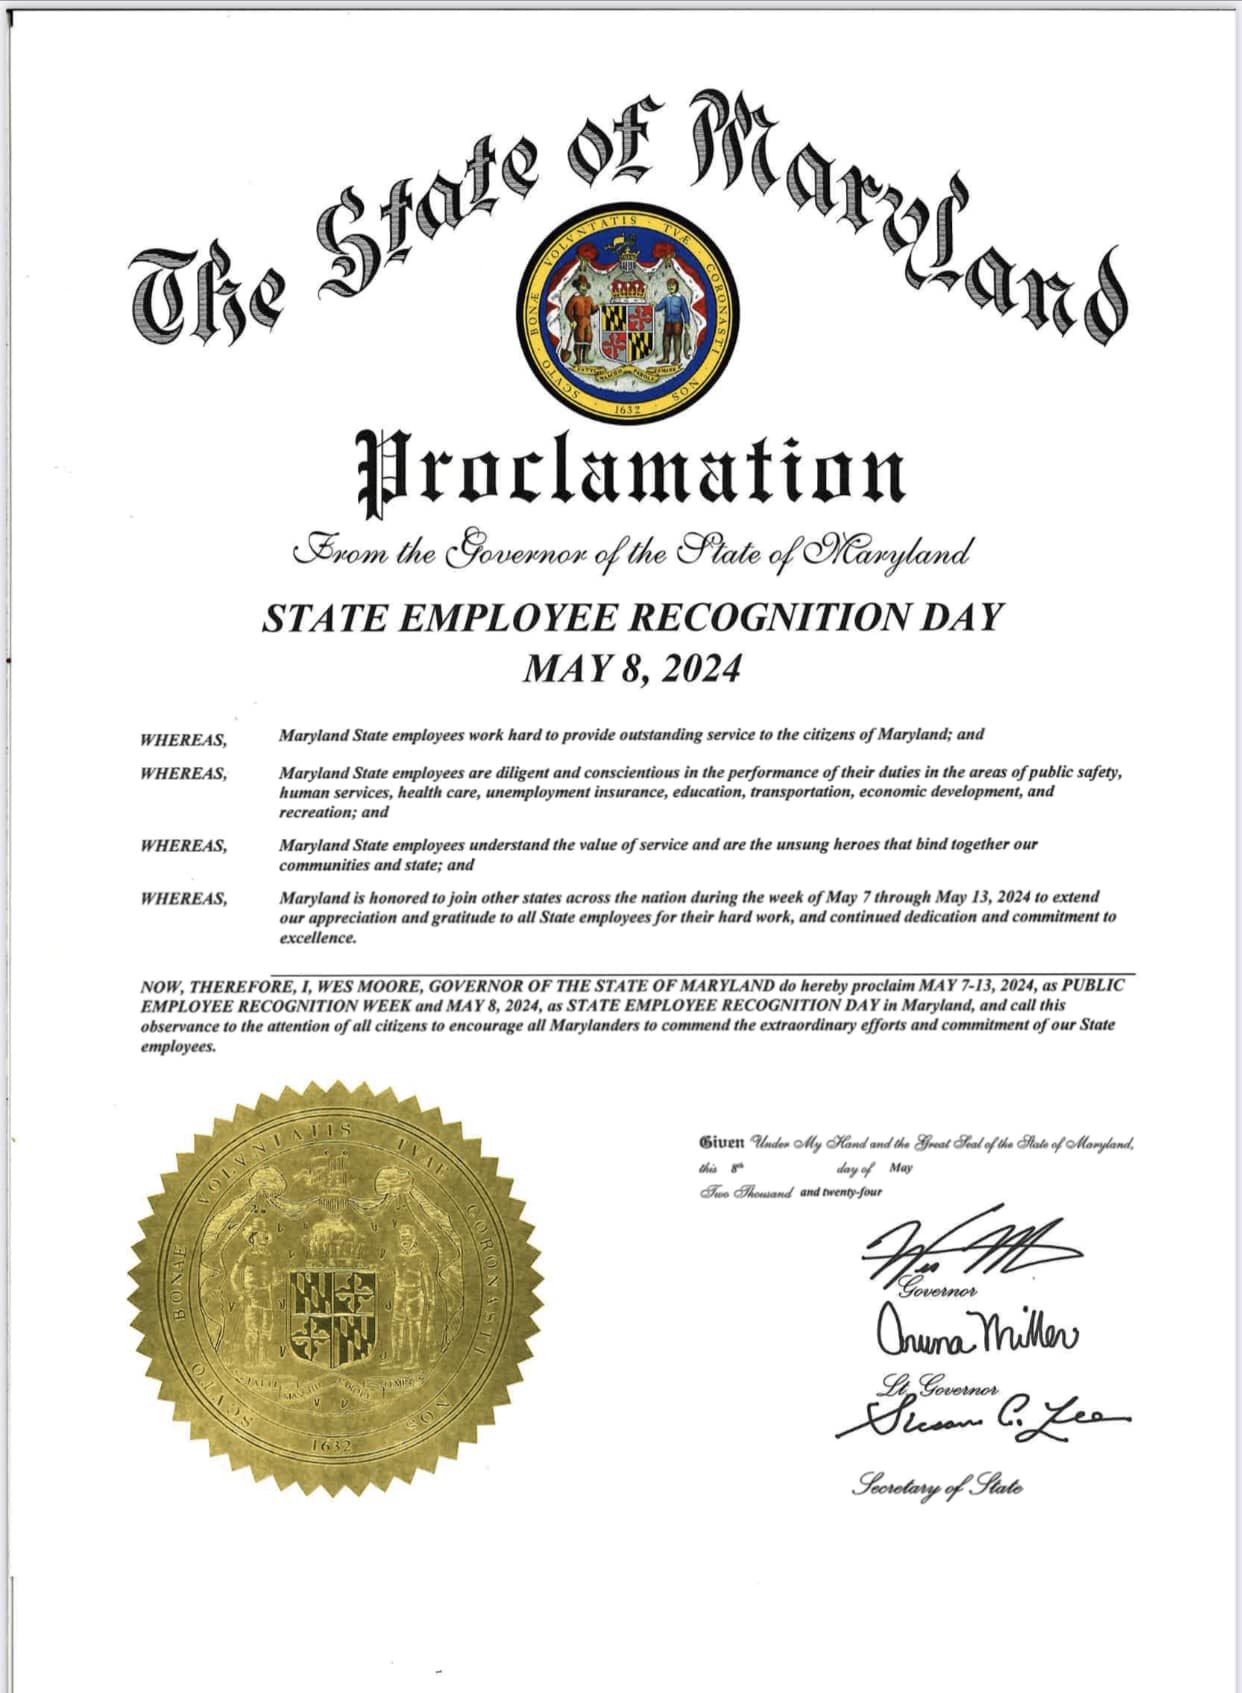 Happy #StateEmployeeRecognitionDay to our Maryland state employees. Thank you team, for all you do.